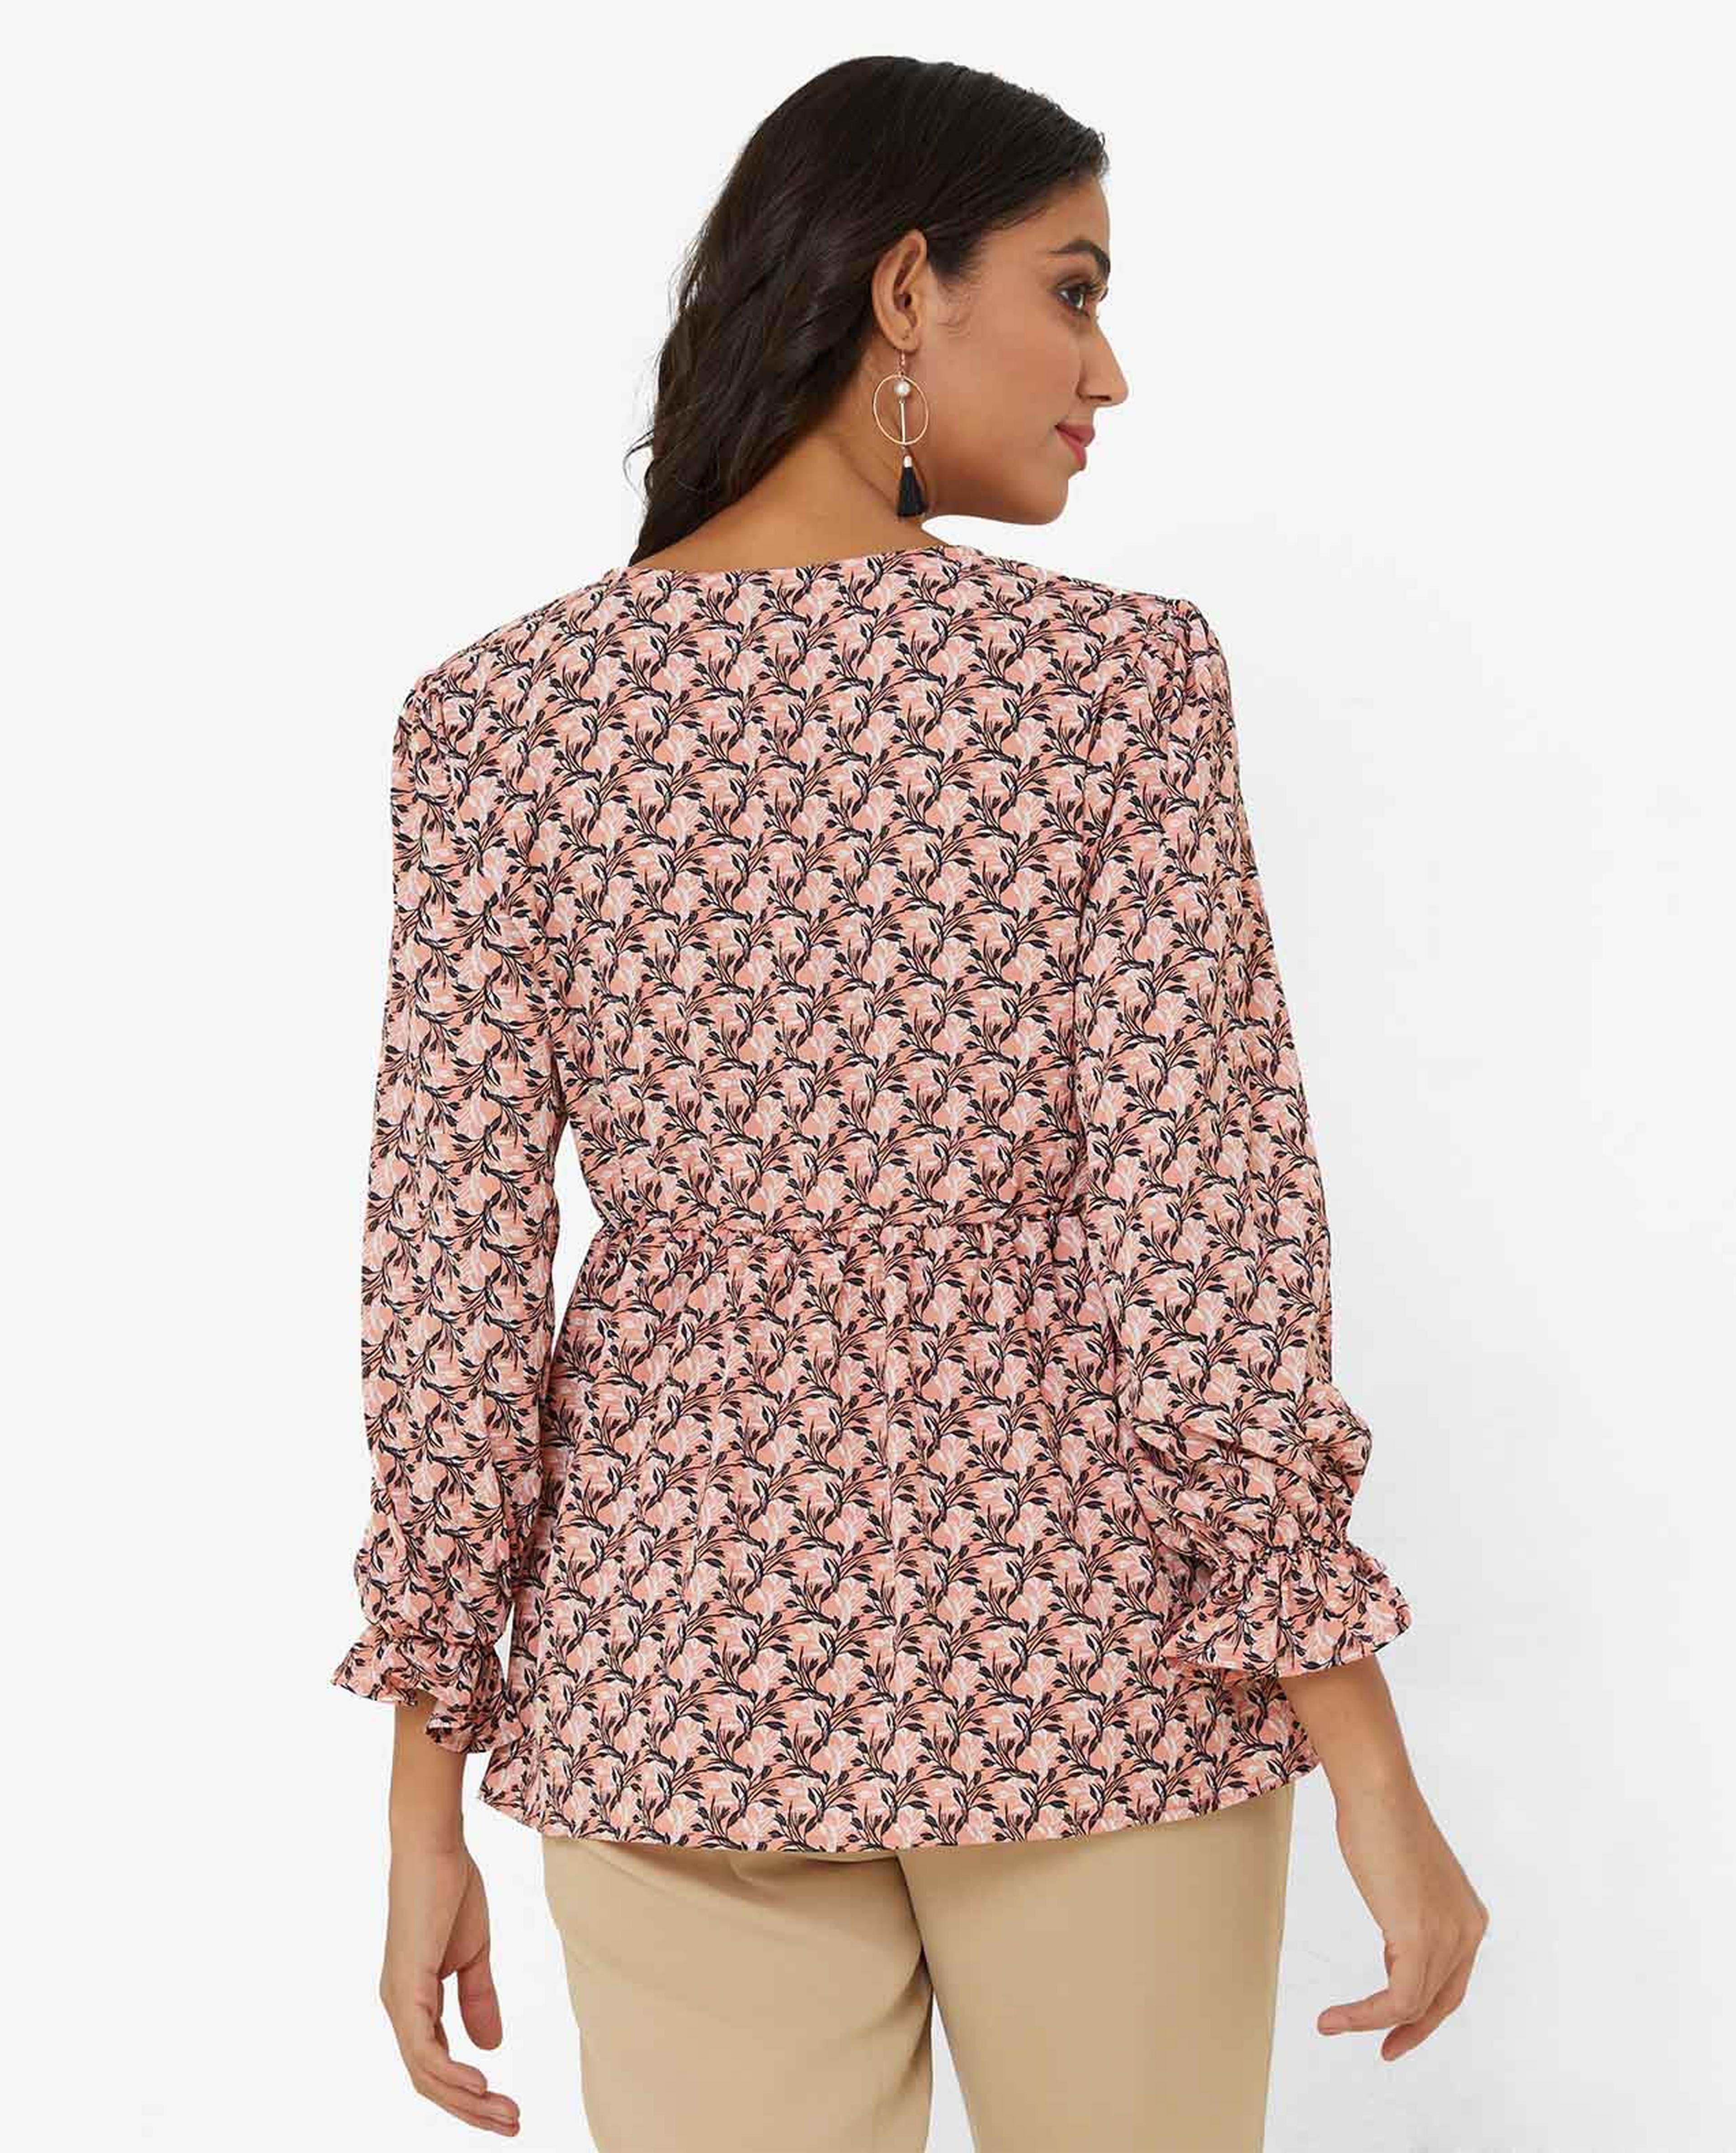 Printed Top with V-Neck and 3/4th Sleeves